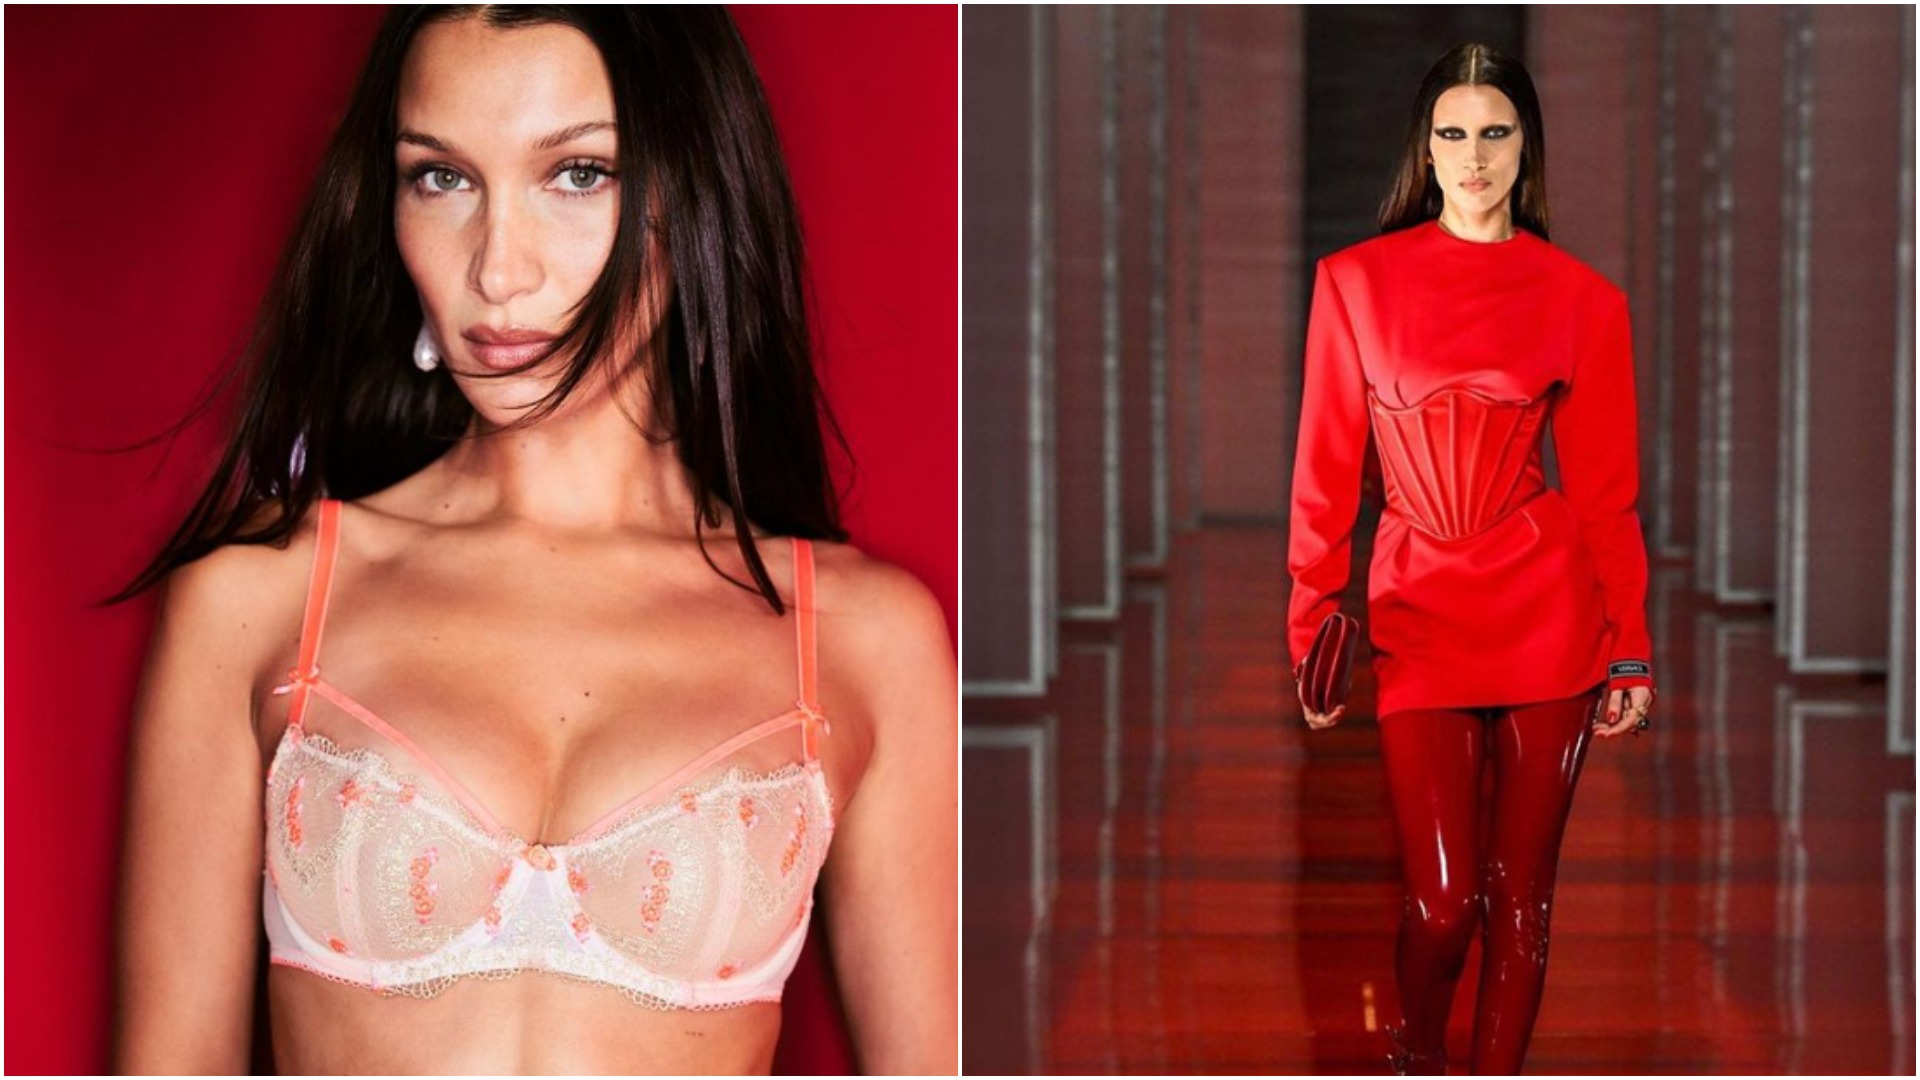 Bella Hadid to Make Acting Debut With Role on Hulu's 'Ramy